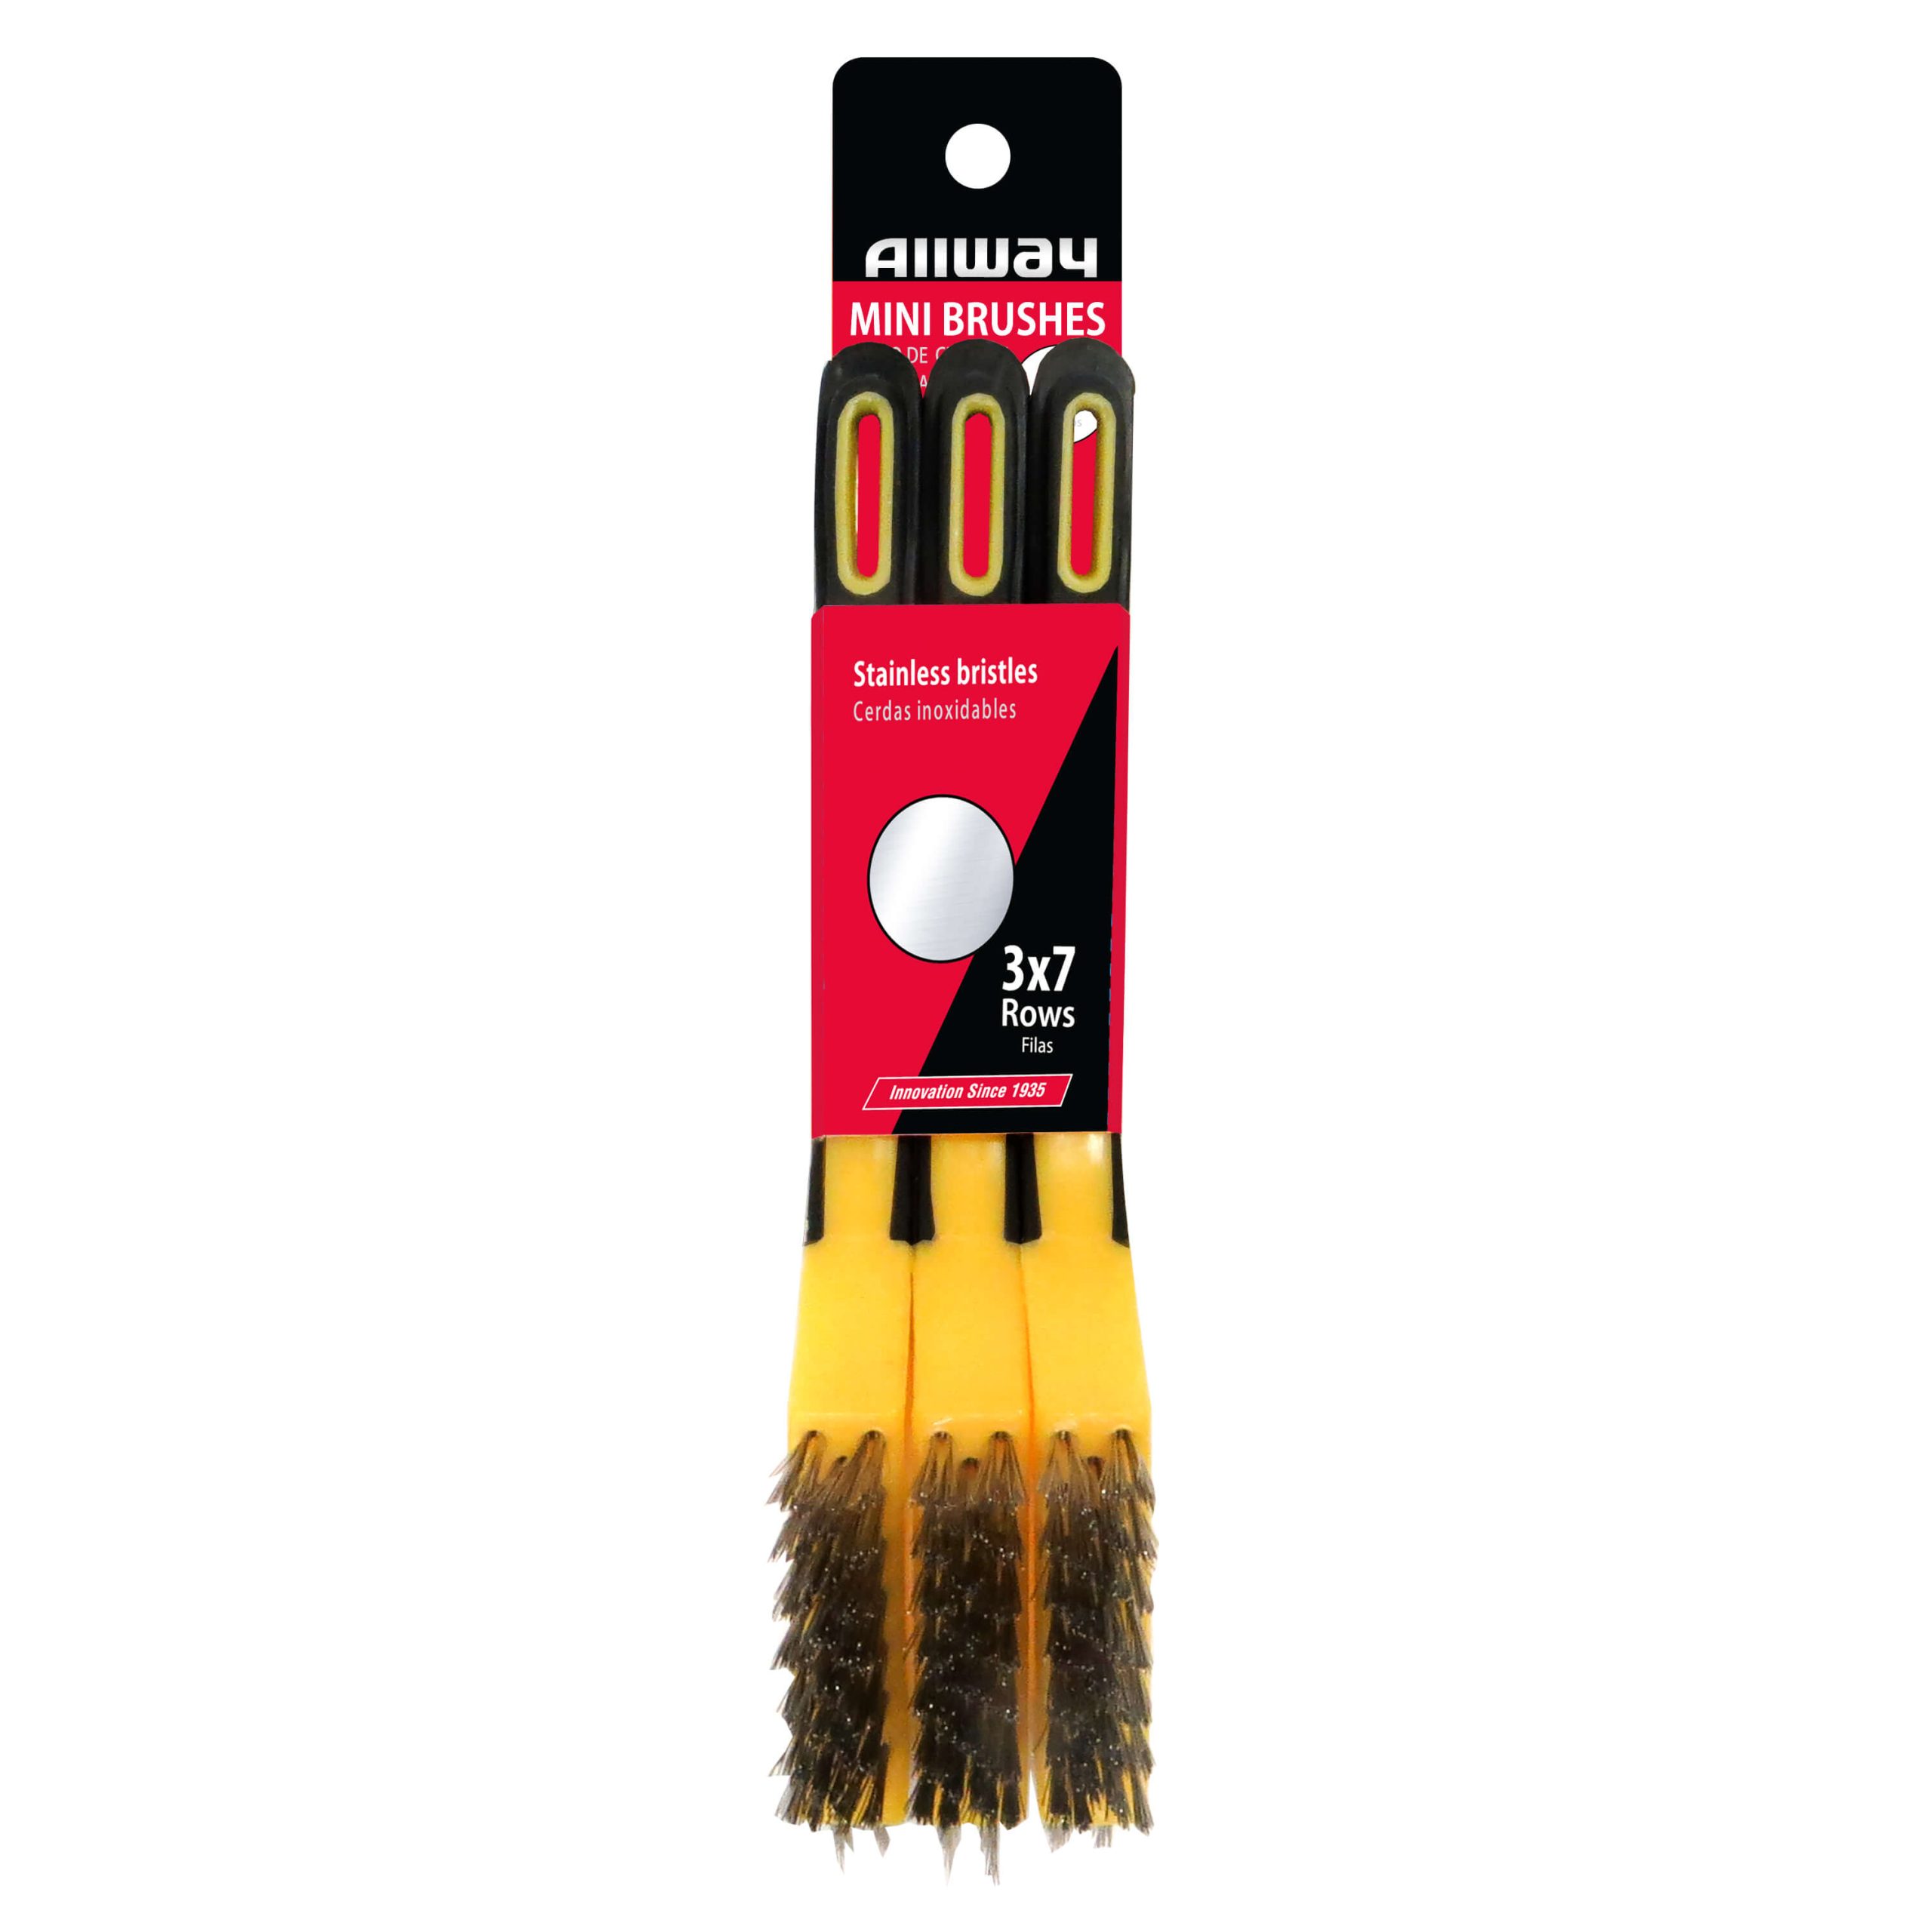 AMB) 3-Piece Soft-Grip Mini Stripper Brush Set, Carded » ALLWAY® The Tools  You Ask For By Name